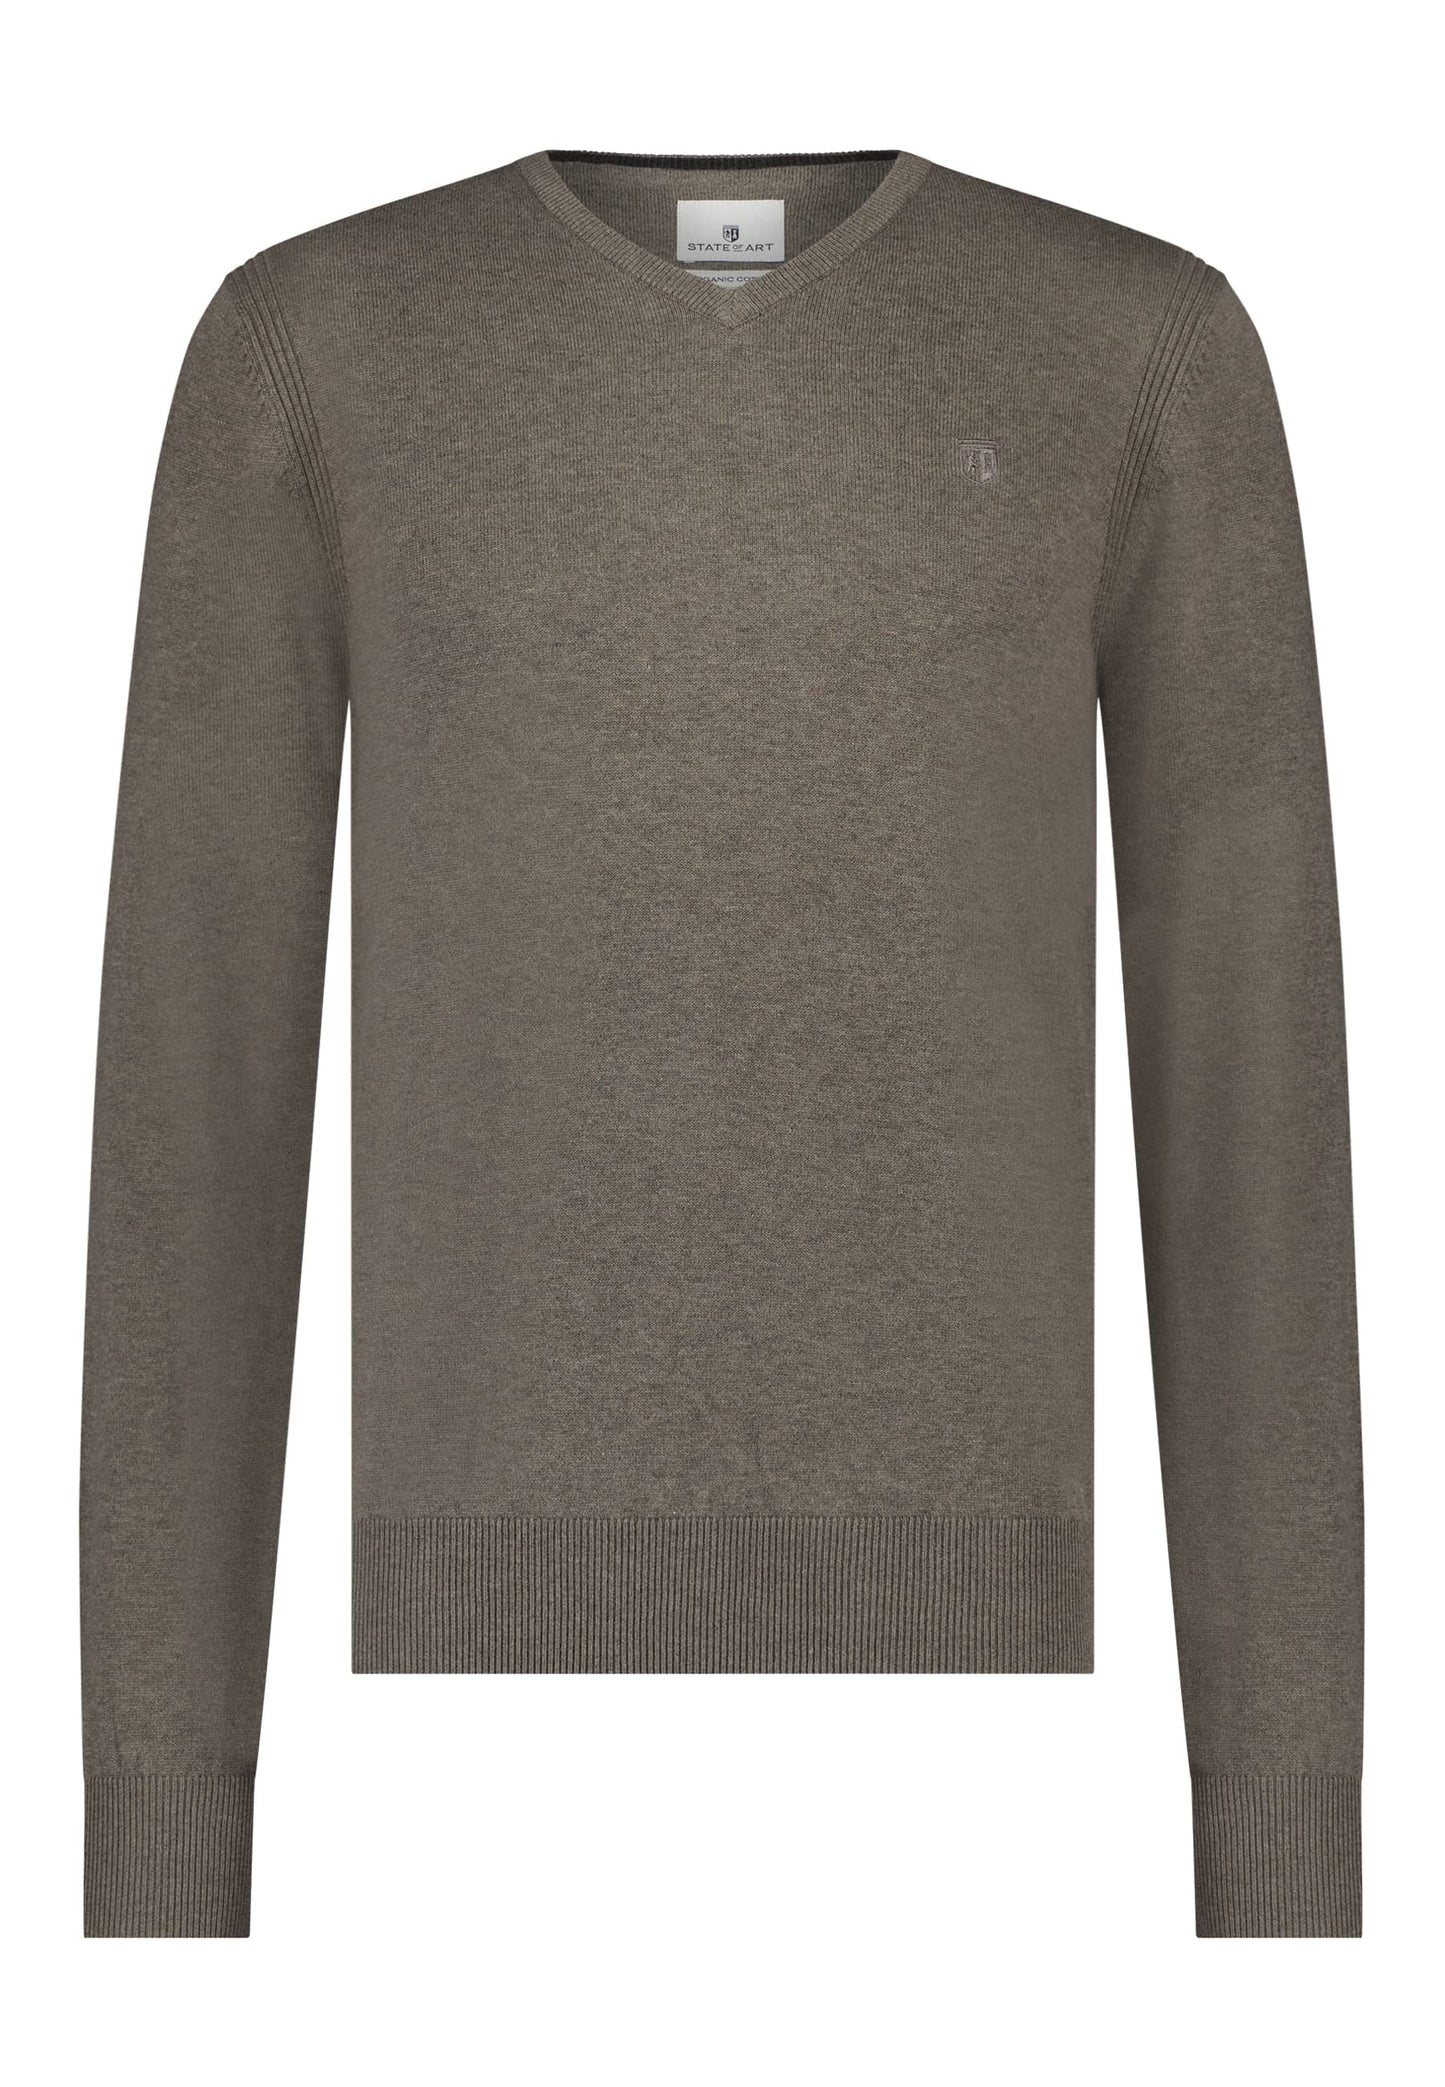 Taupe cotton V-neck pullover State of Art - 22007/8600